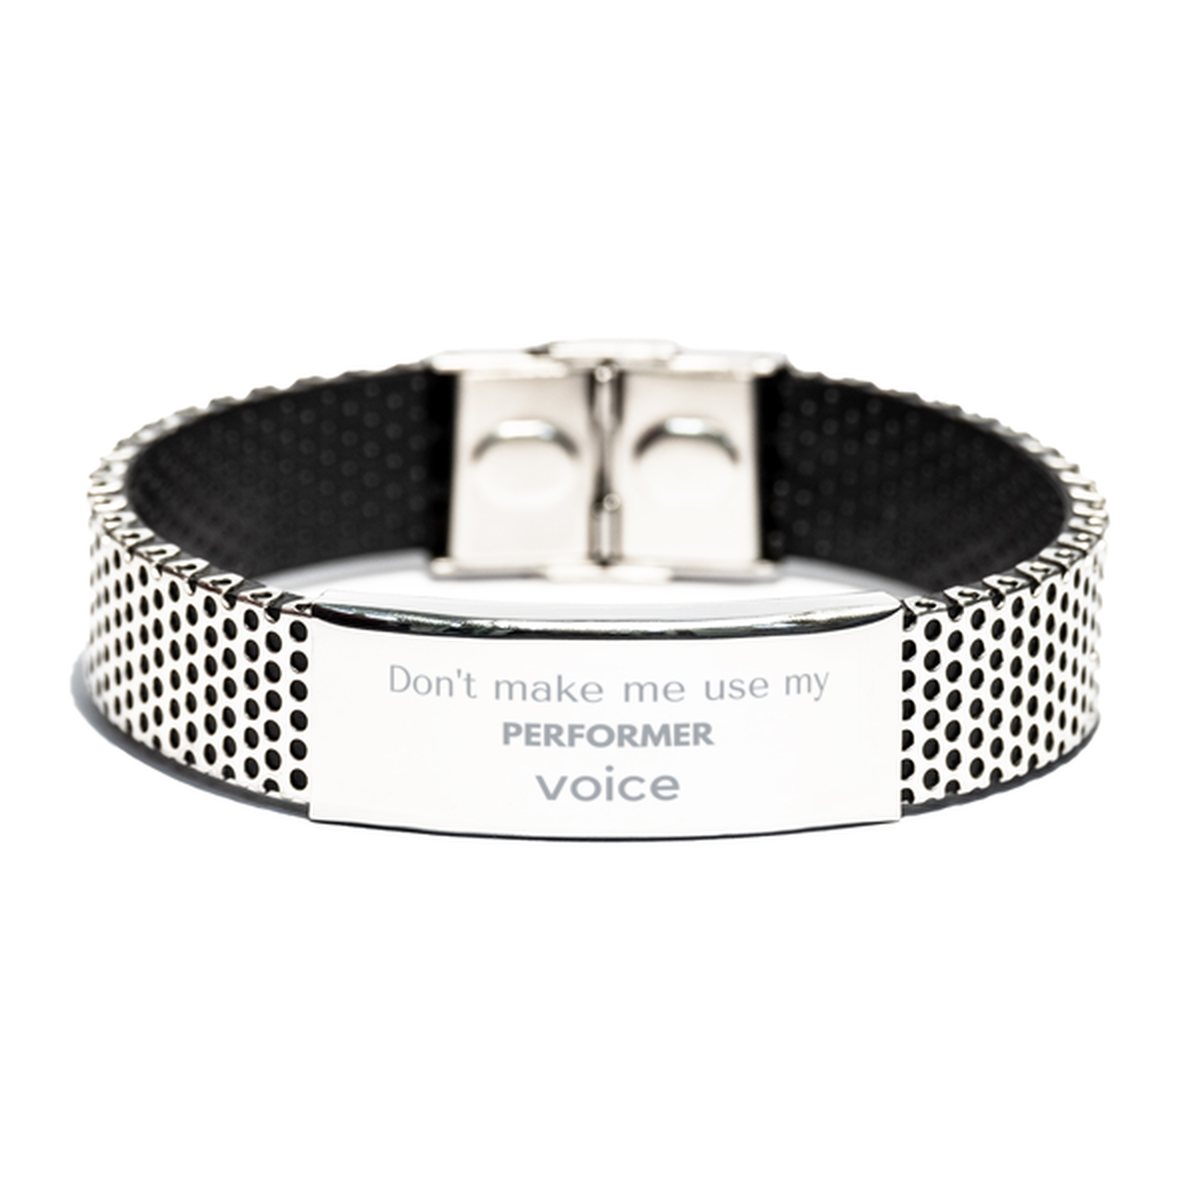 Don't make me use my Performer voice, Sarcasm Performer Gifts, Christmas Performer Stainless Steel Bracelet Birthday Unique Gifts For Performer Coworkers, Men, Women, Colleague, Friends